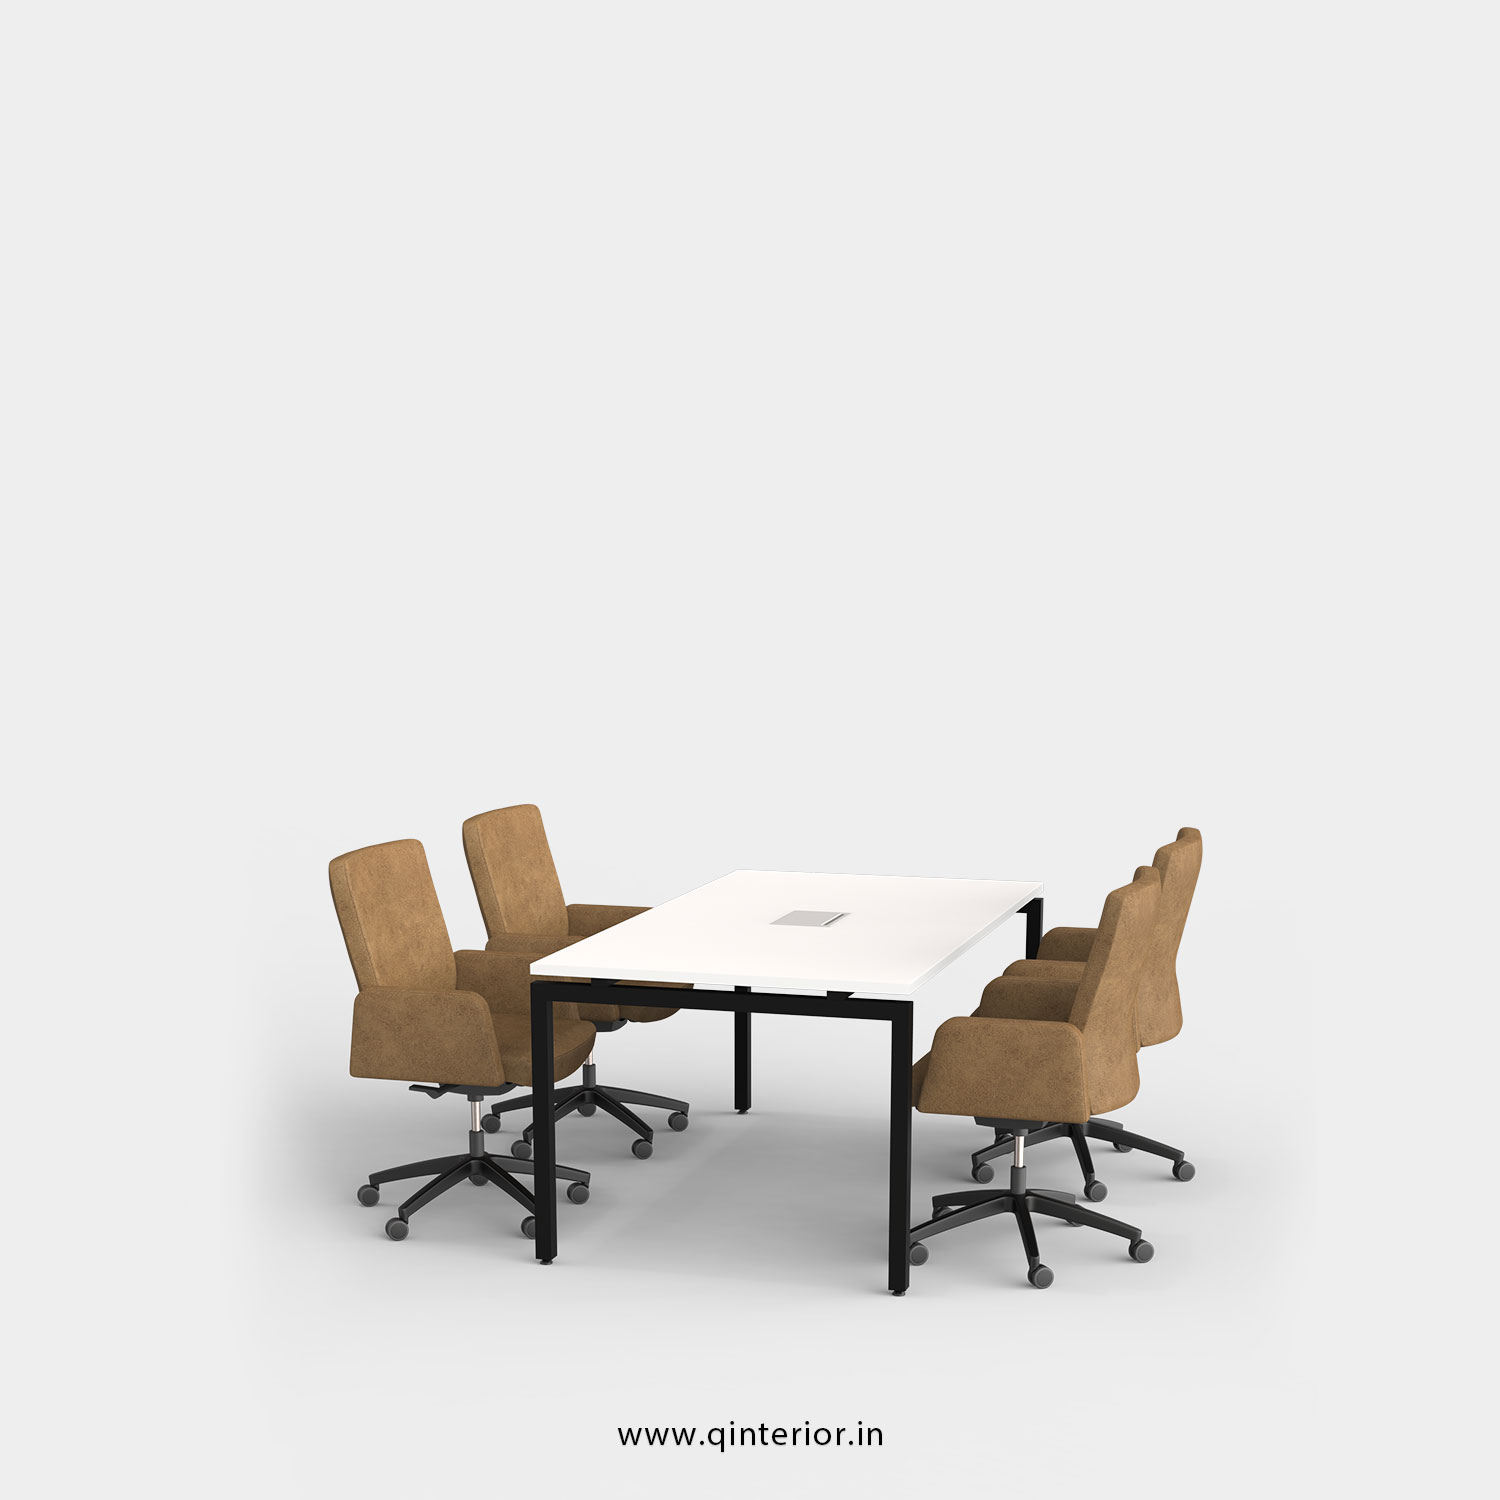 Montel Meeting Table in White Finish - OMT001 C4